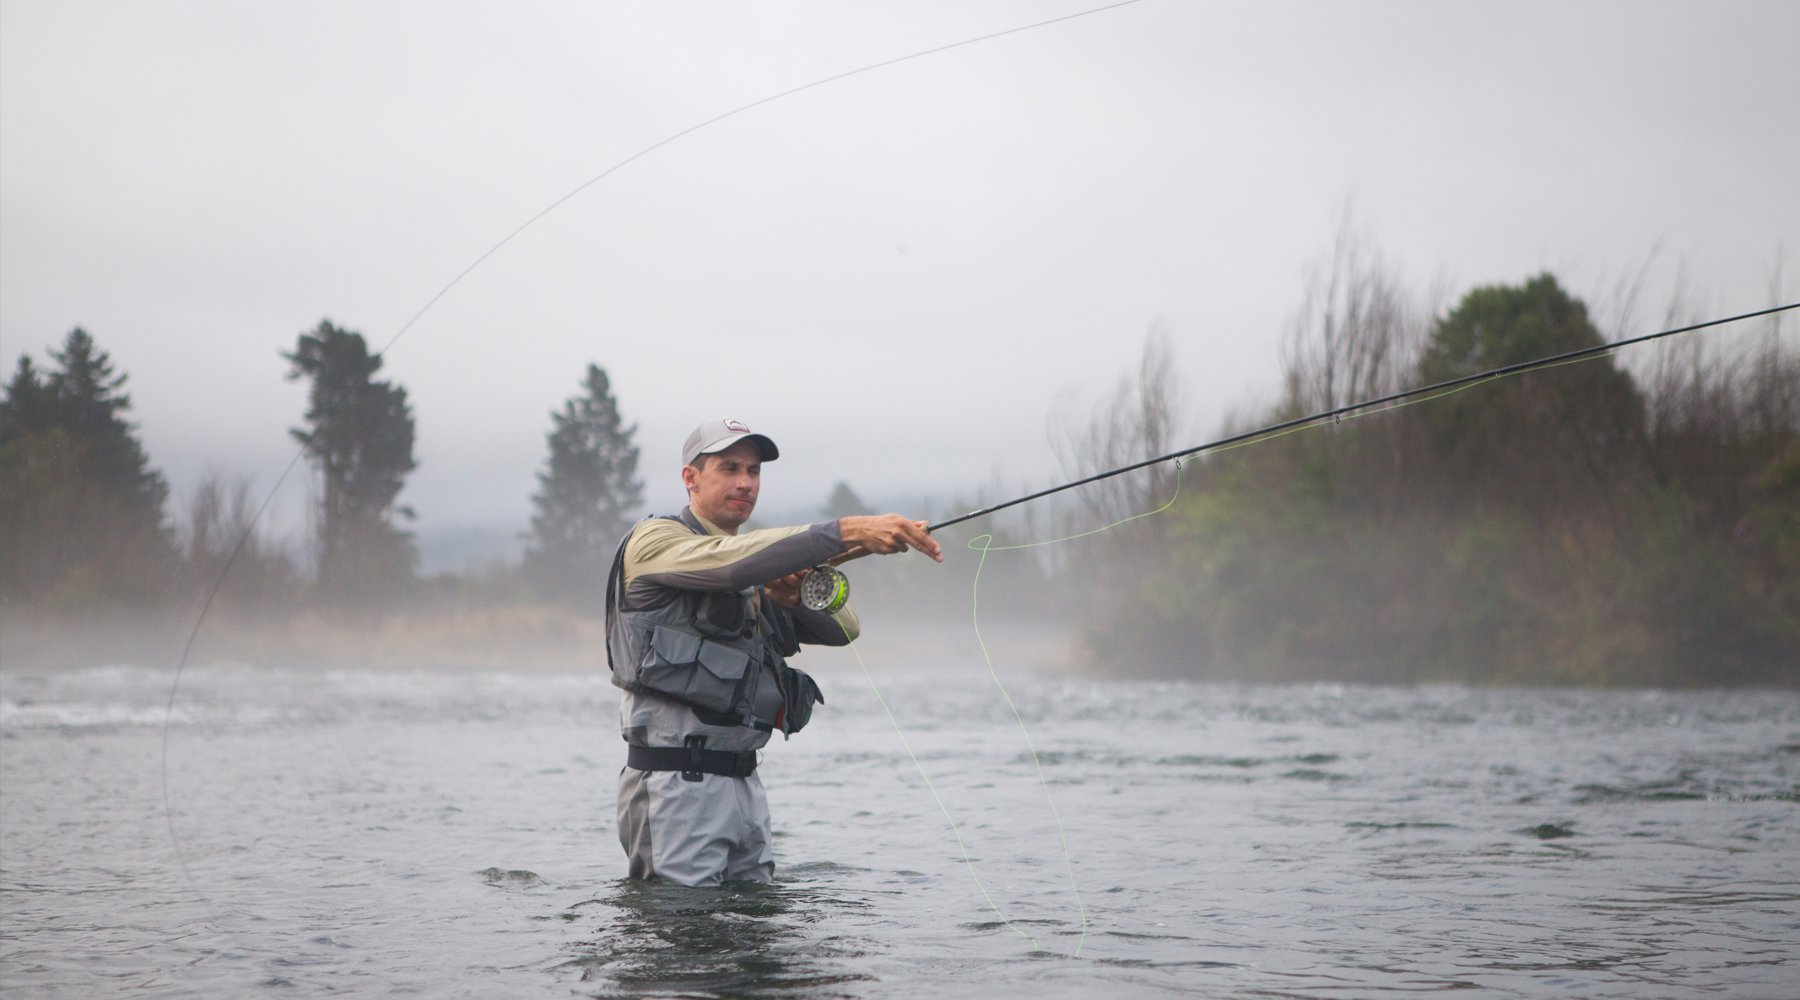 Fly Lines for Double Handed & Spey Casting Rods - Farlows